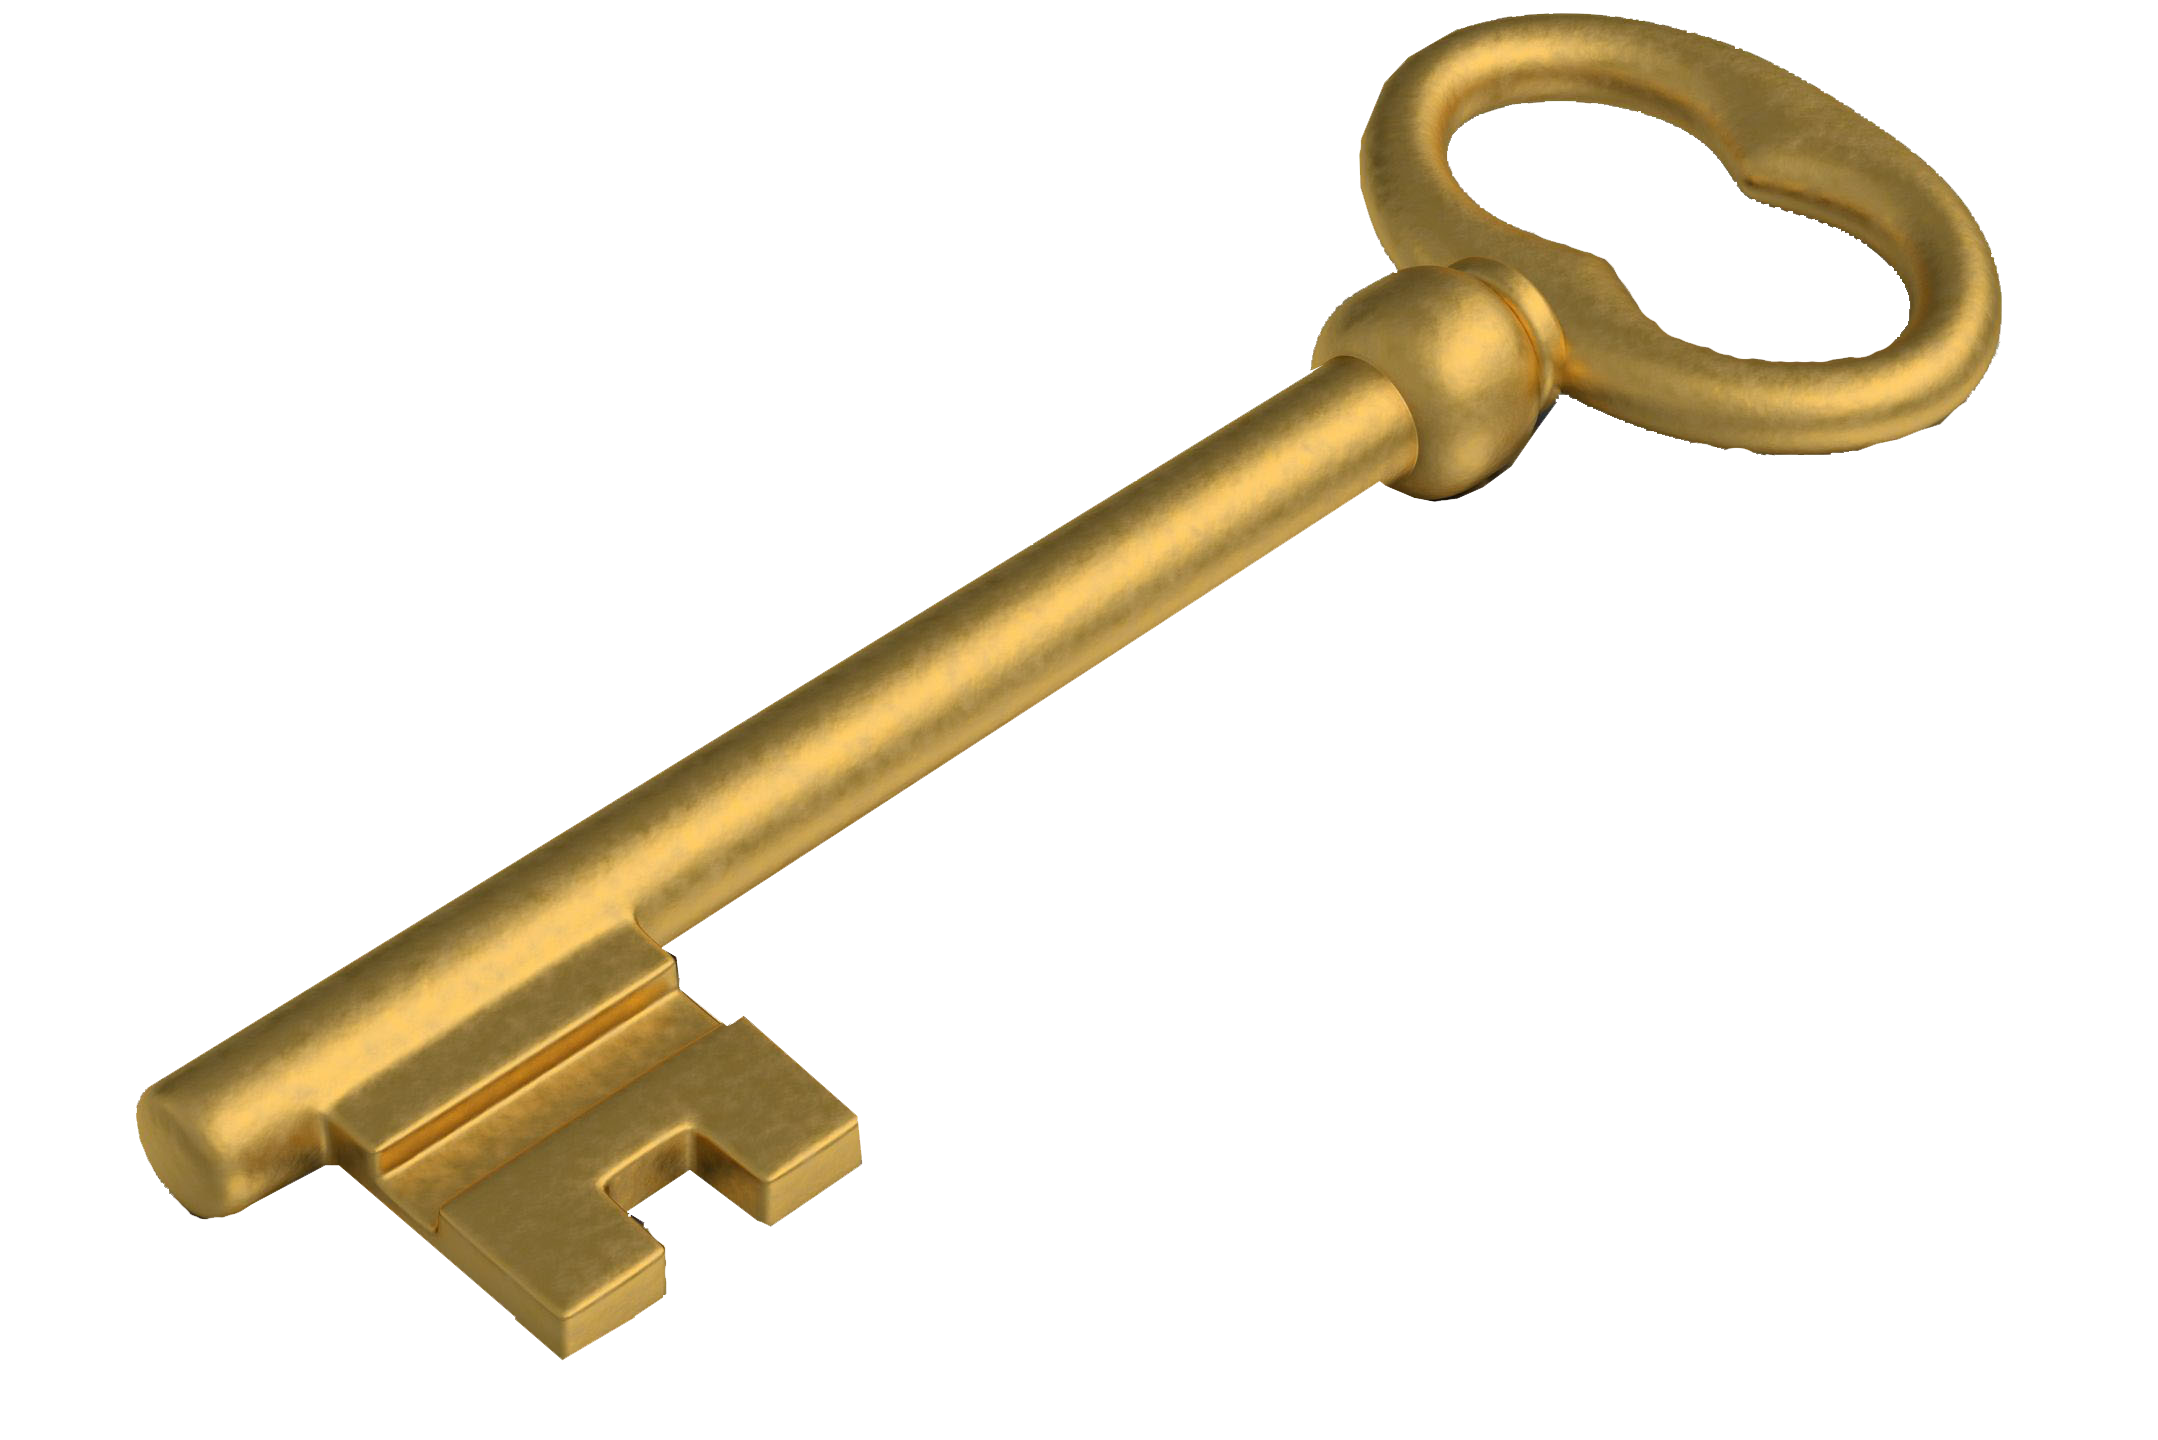 Golden Key - LIBERTY (SECURITY PRIVACY SAFETY) THE ILLUSION OF FREE WILL - TOTAL FREEDOM OF SPEECH - TOTAL FREEDOM OF THE PRESS - UNIVERSAL SPENDING AUTHORITY - VIRTUAL PRIVATE PROPERTY - FEE-FREE LAND USE - THERE IS NO GOVERNMENT - A GUARANTEED LIFETIME INCOME - NOW YOU OWN YOUR HOME AND LAND - NOW YOU HAVE AN INCOME - YOU WILL ALWAYS OWN YOUR HOME AND LAND WHILE YOU LIVE THERE - YOU ARE SAFE AND SECURE